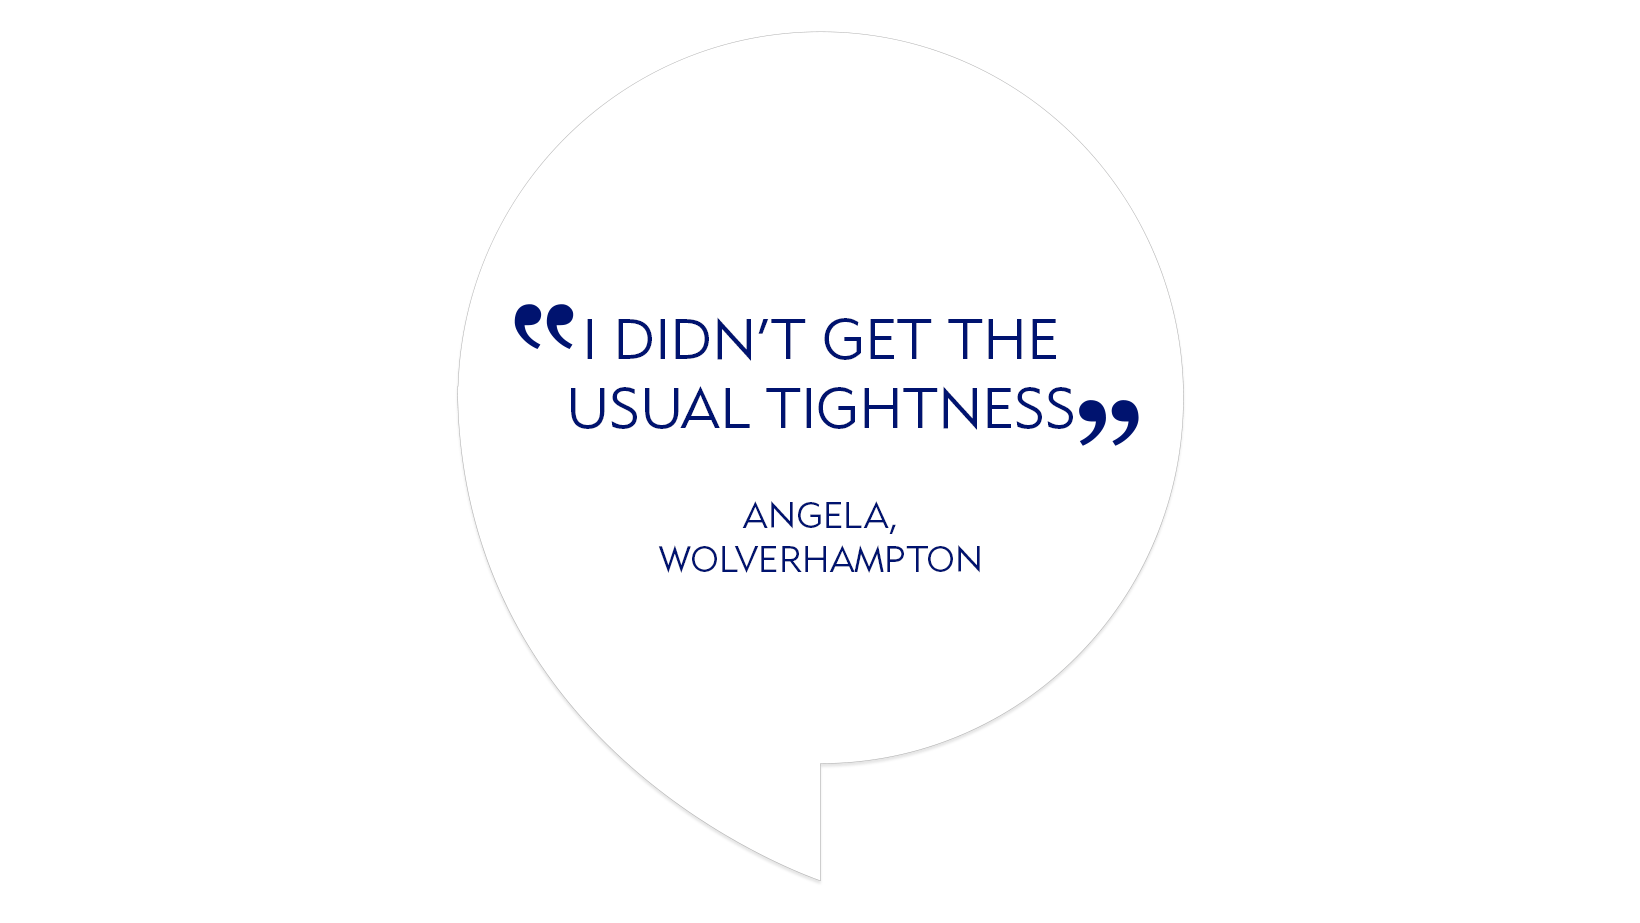 Testimonial quote: "I didn't get the usual tightness"